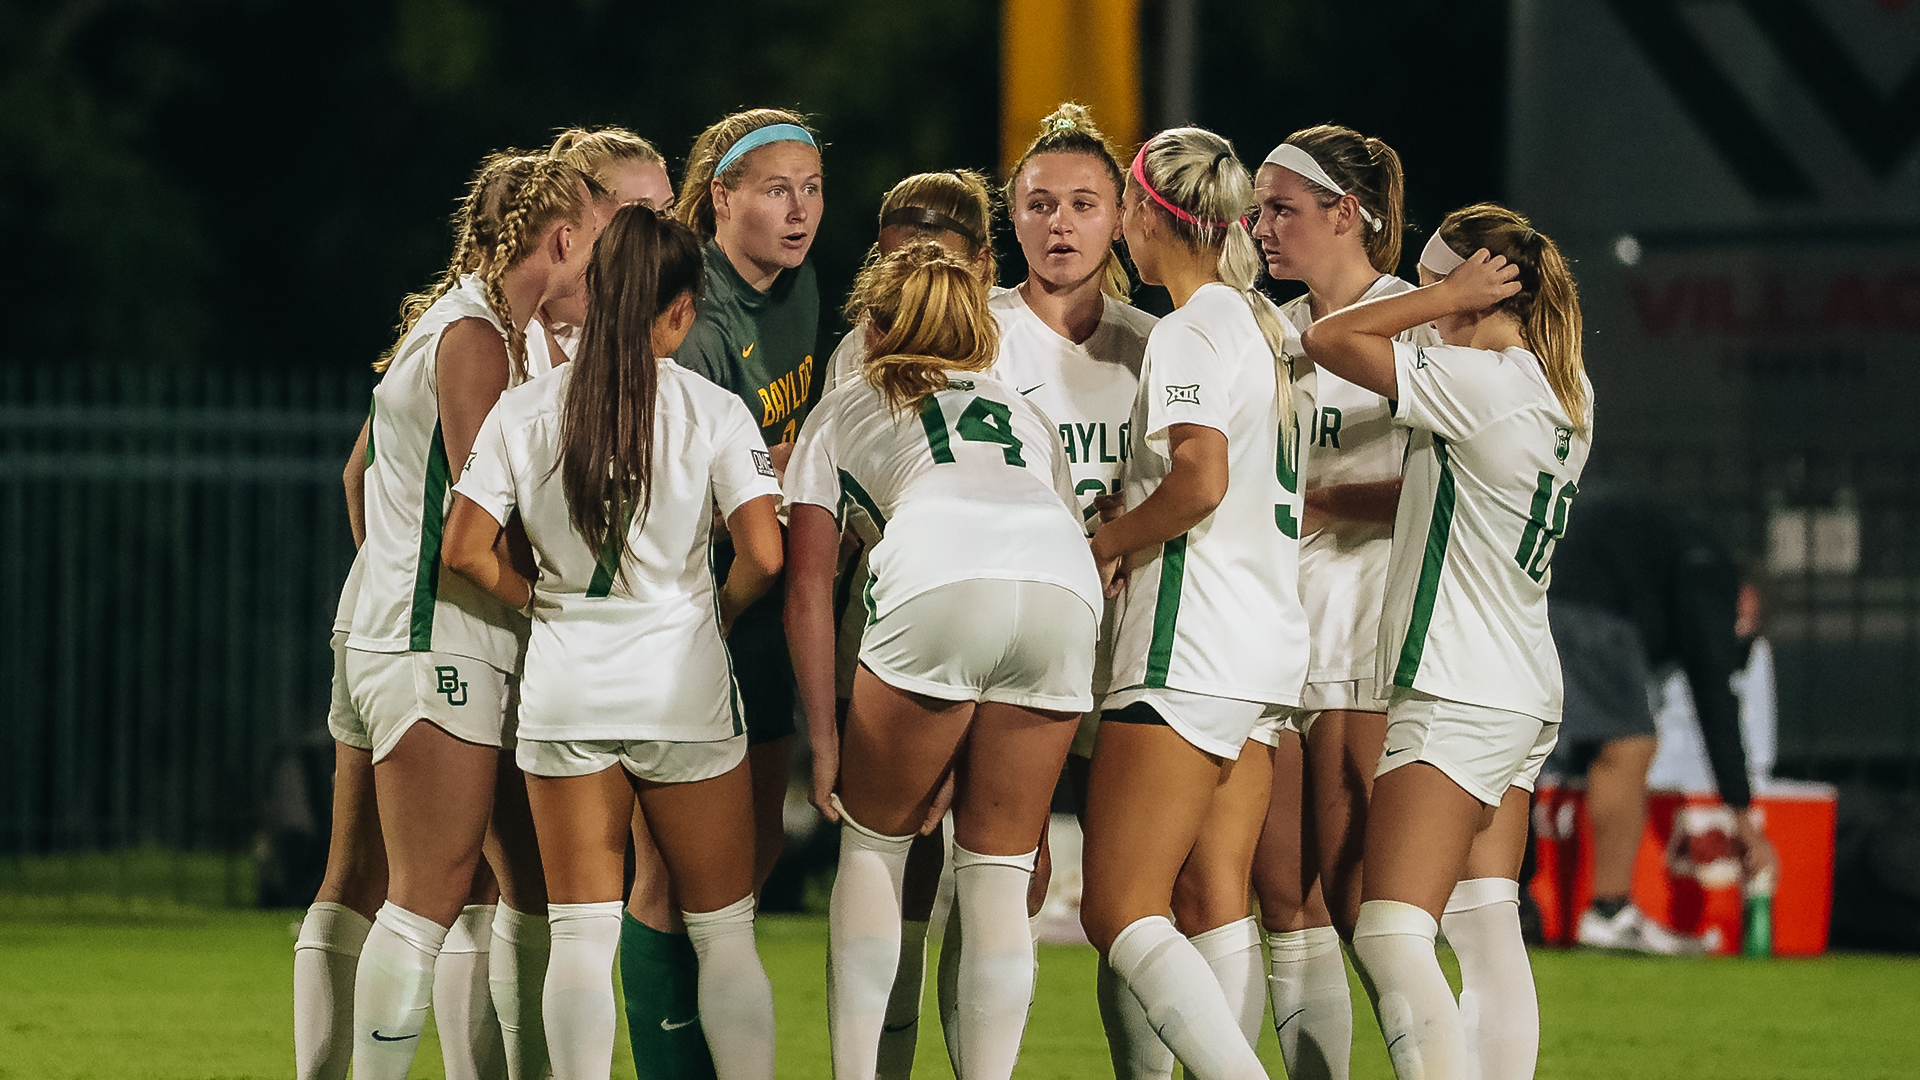 Still fighting for first win, soccer hosts another tough Big 12 team in ...